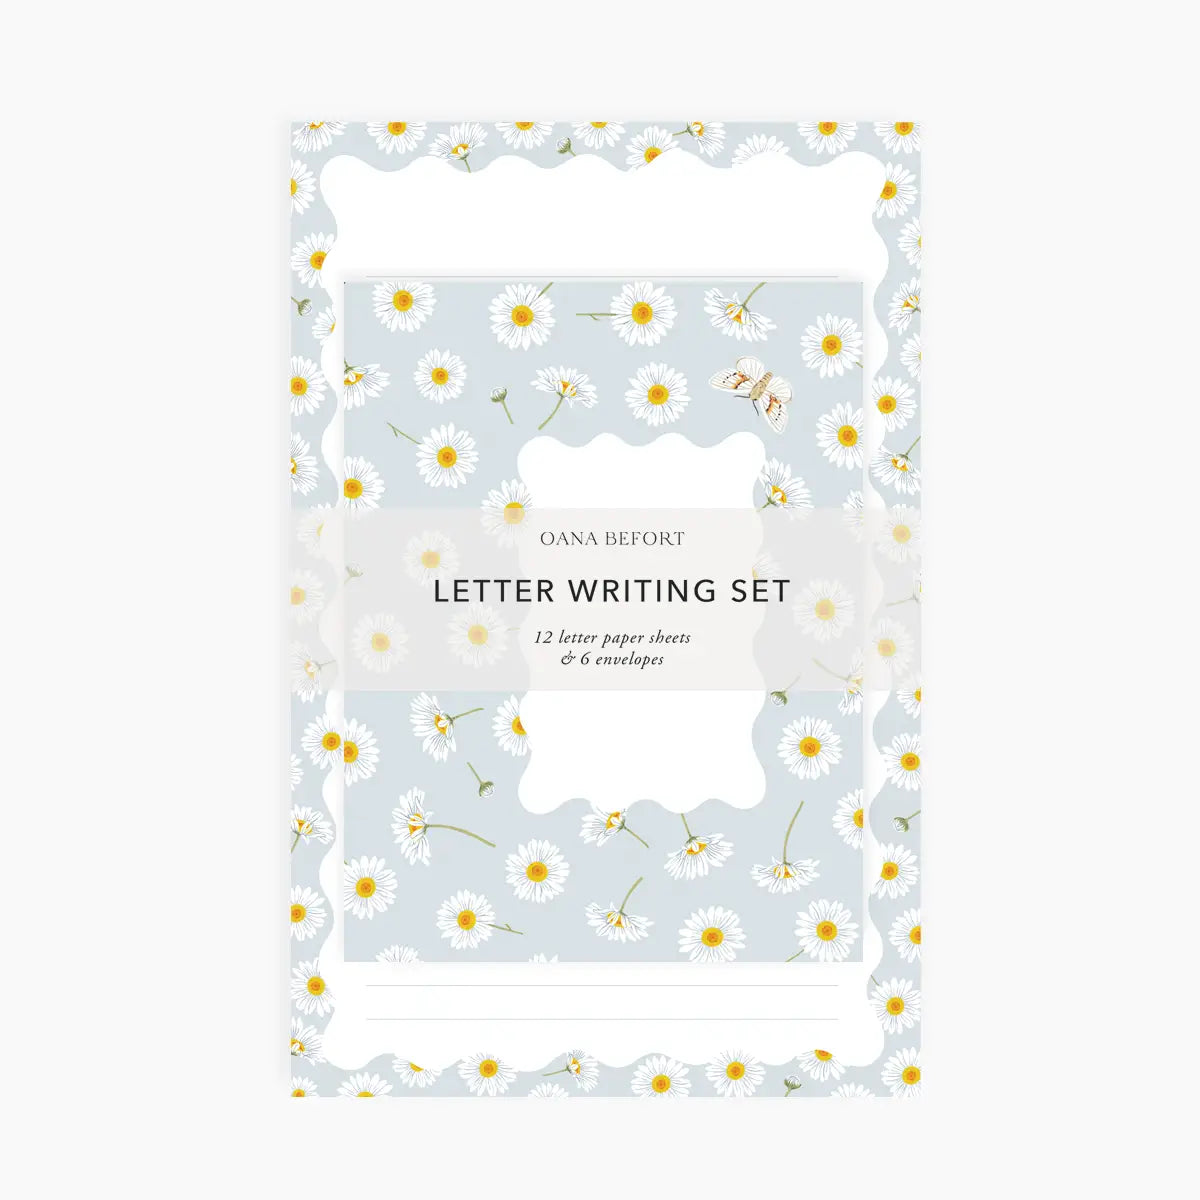 Letter writing set 'Daisy' by Botanica Paper co.